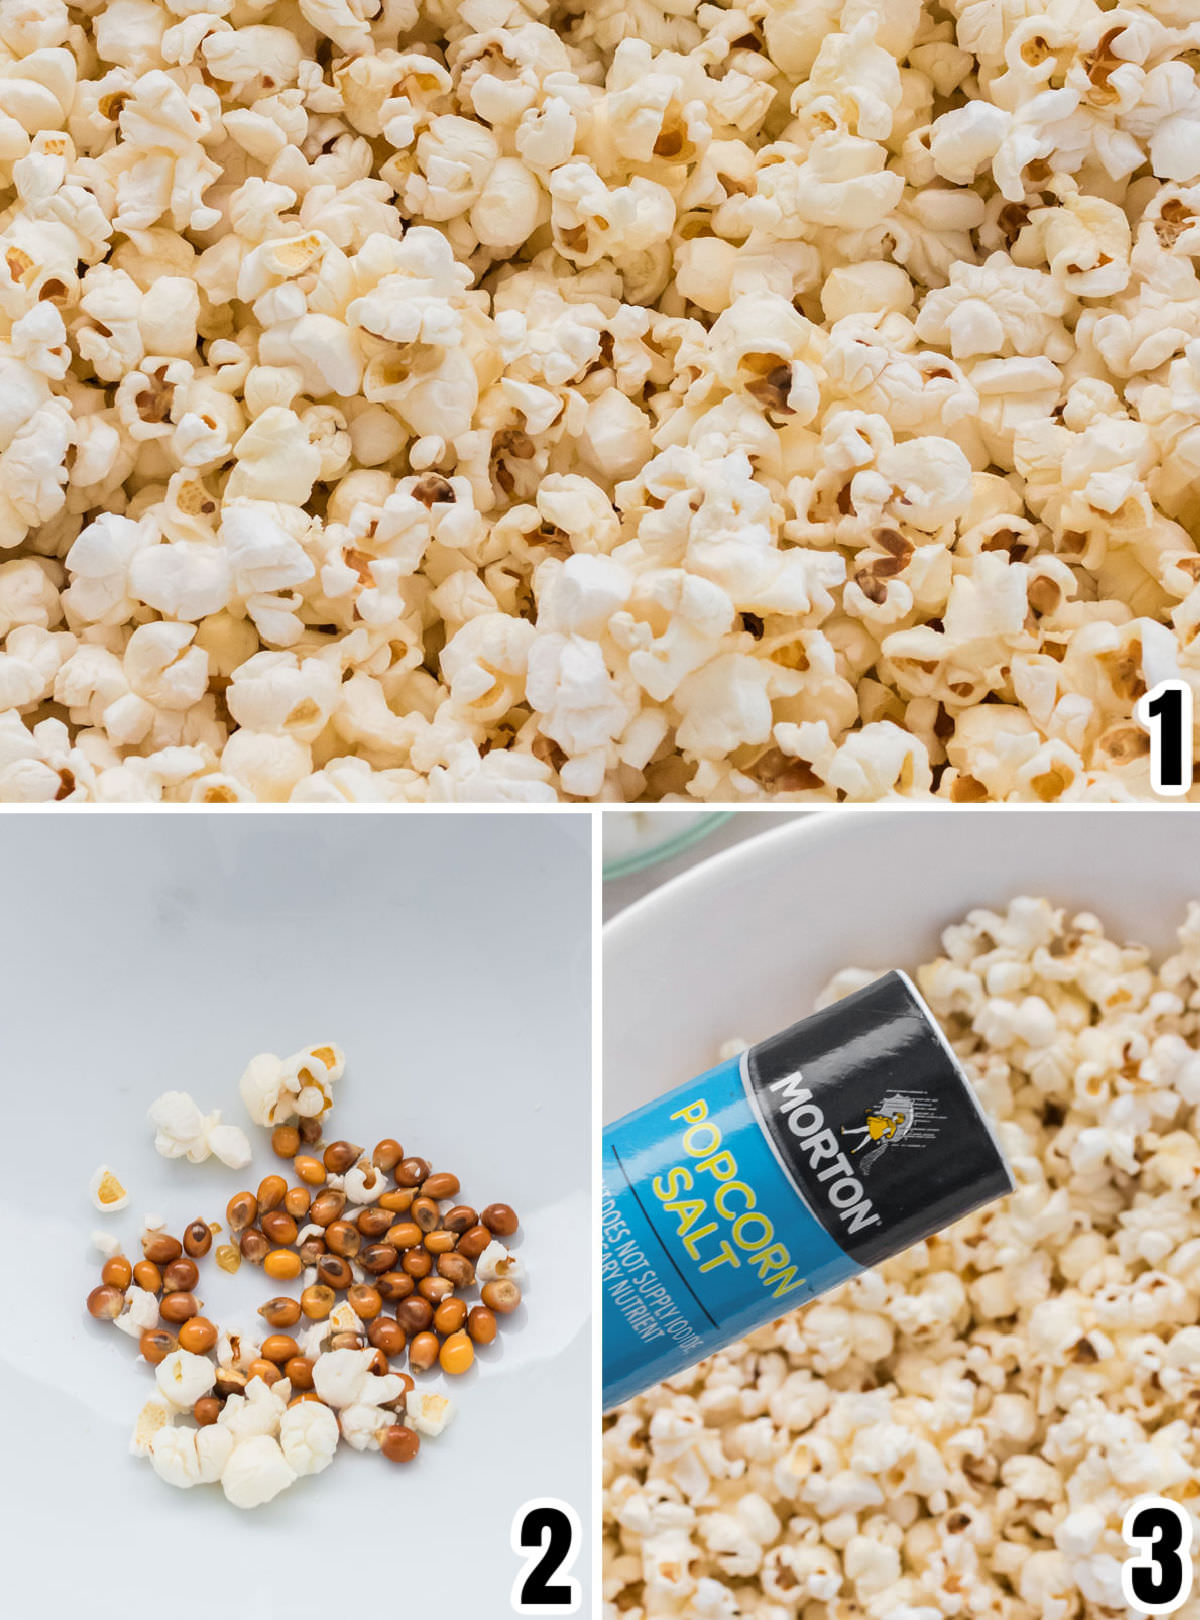 Collage image showing how to make the popcorn for the Oreo Popcorn.